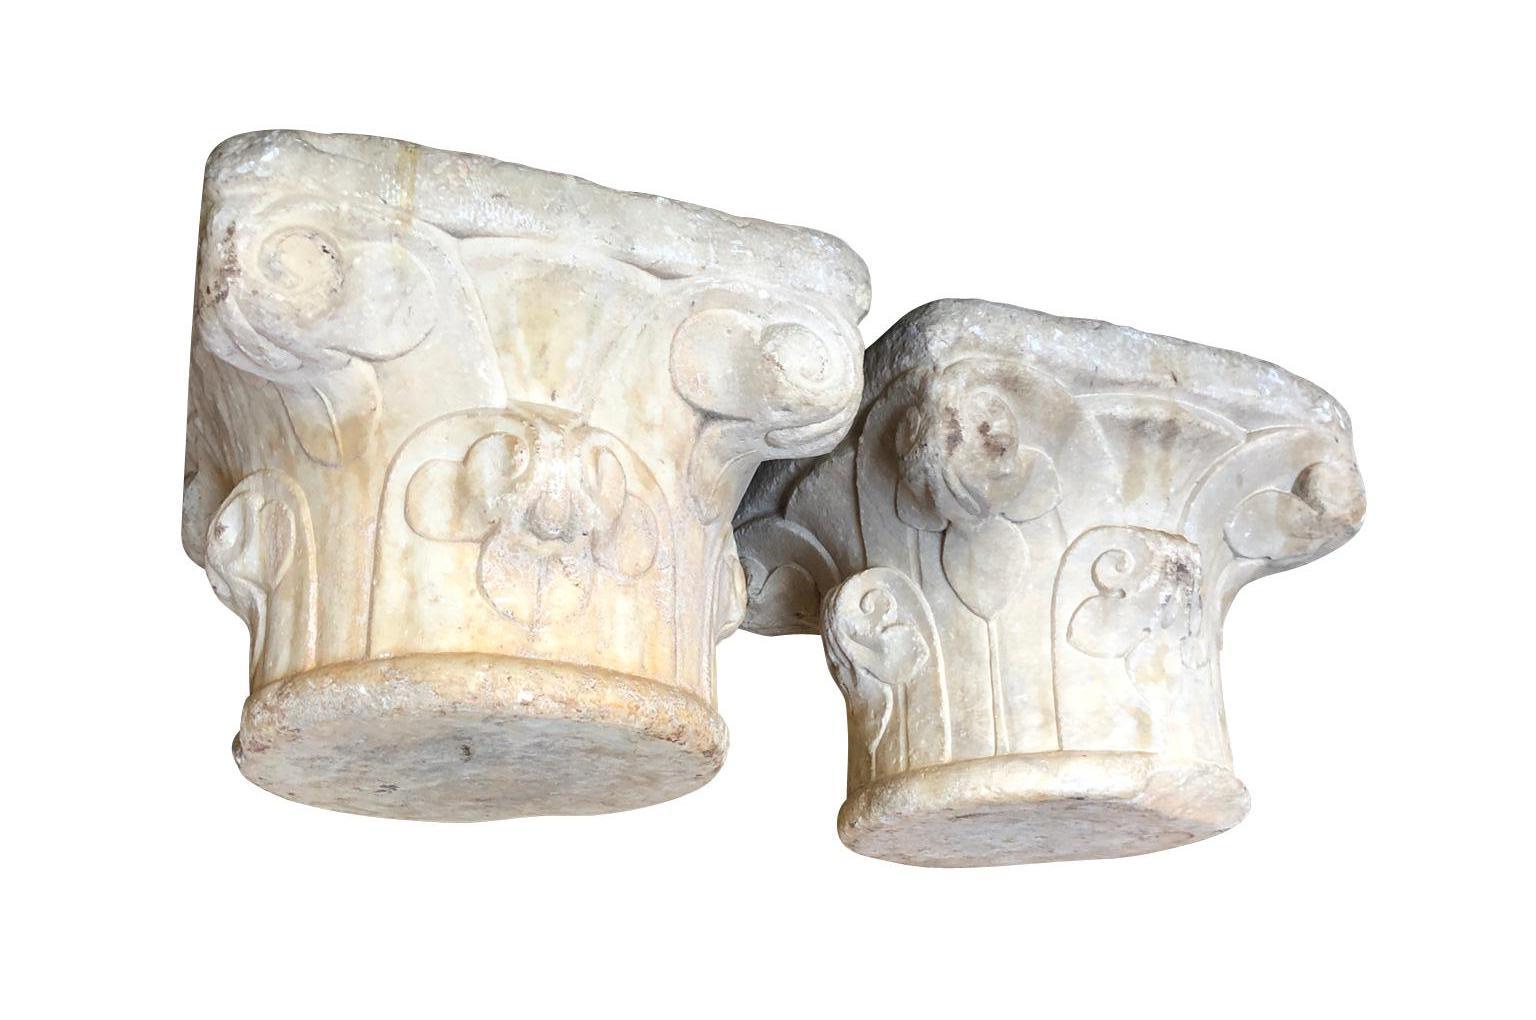 A sensational pair of 16th century Capitales Sevillanos, fabricated in Italy of Carrara marble and then brought to Seville, Spain. Wonderful architectural elements to incorporate into a stunning surrounding.